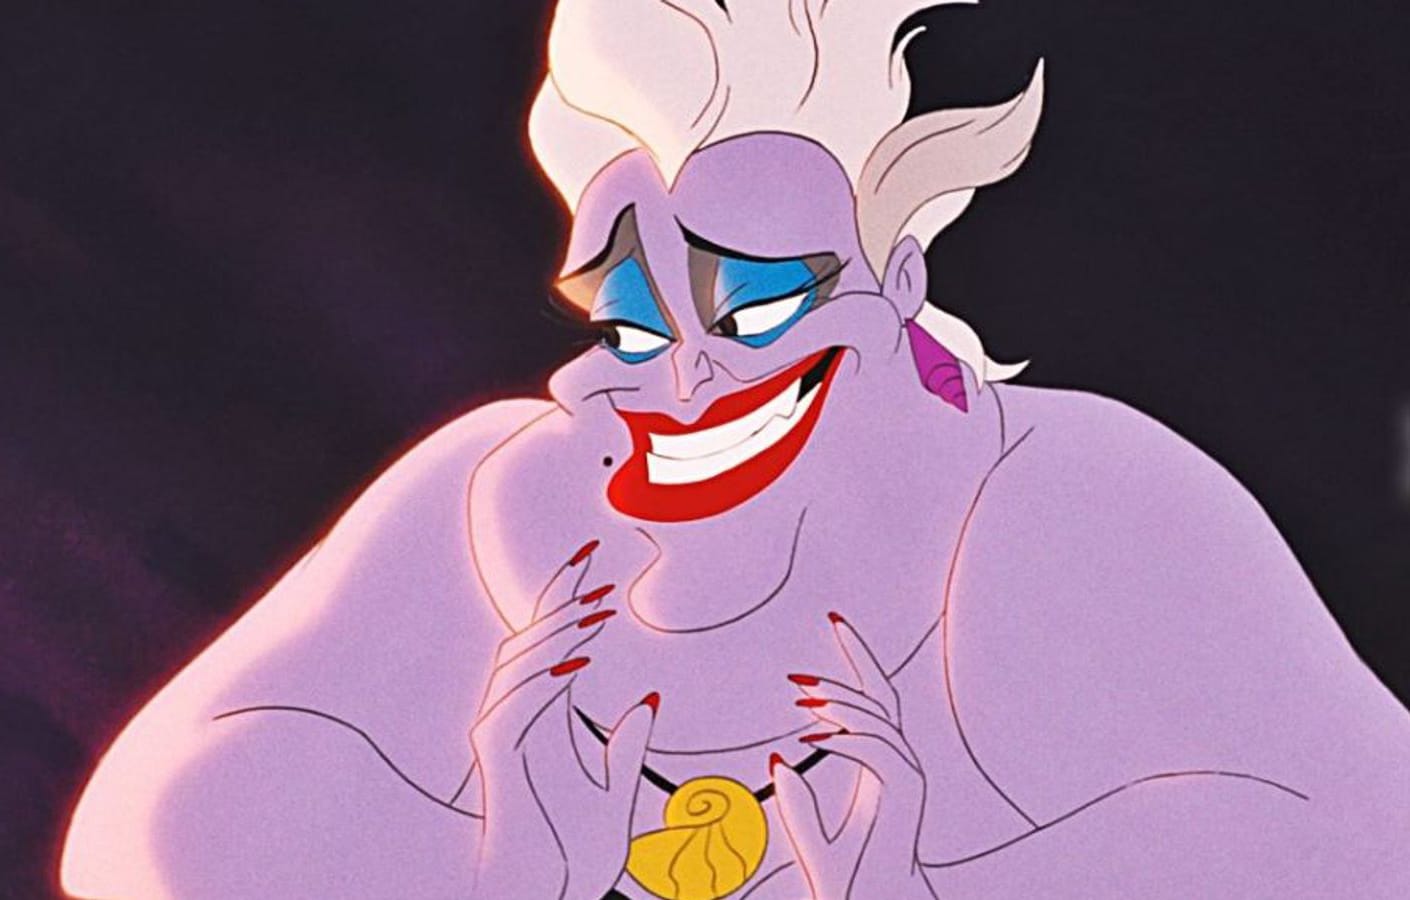 How an outrageous drag queen found mainstream fame in 'The Little Mermaid'